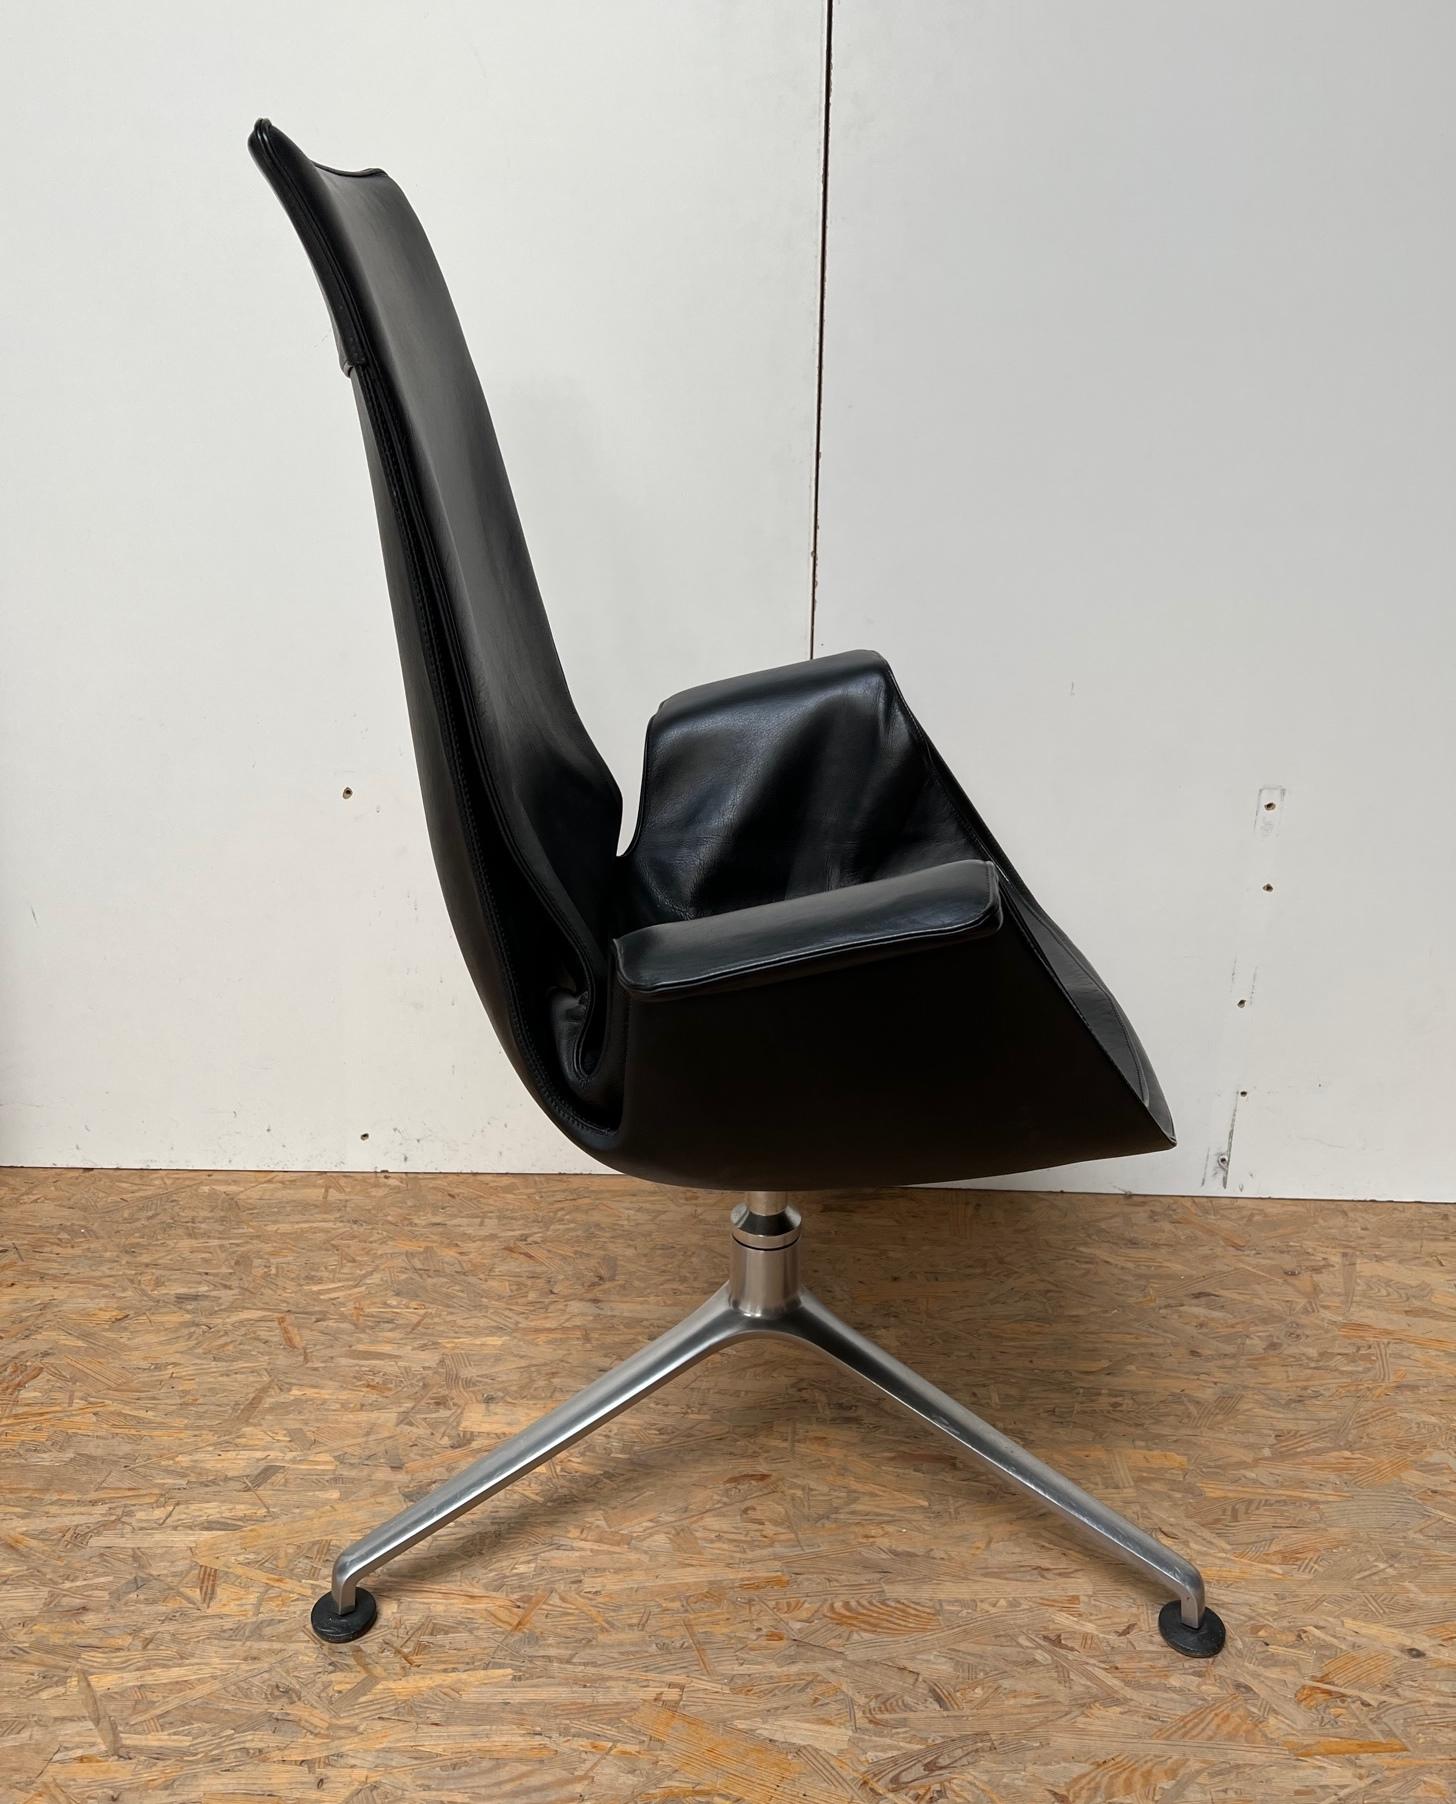 These early examples of the FK6725 high back executive chairs were designed by Jorgen Kastholm & Preben Fabricius in the early 60s and produced by Kill International in the late 1960s. The so called 